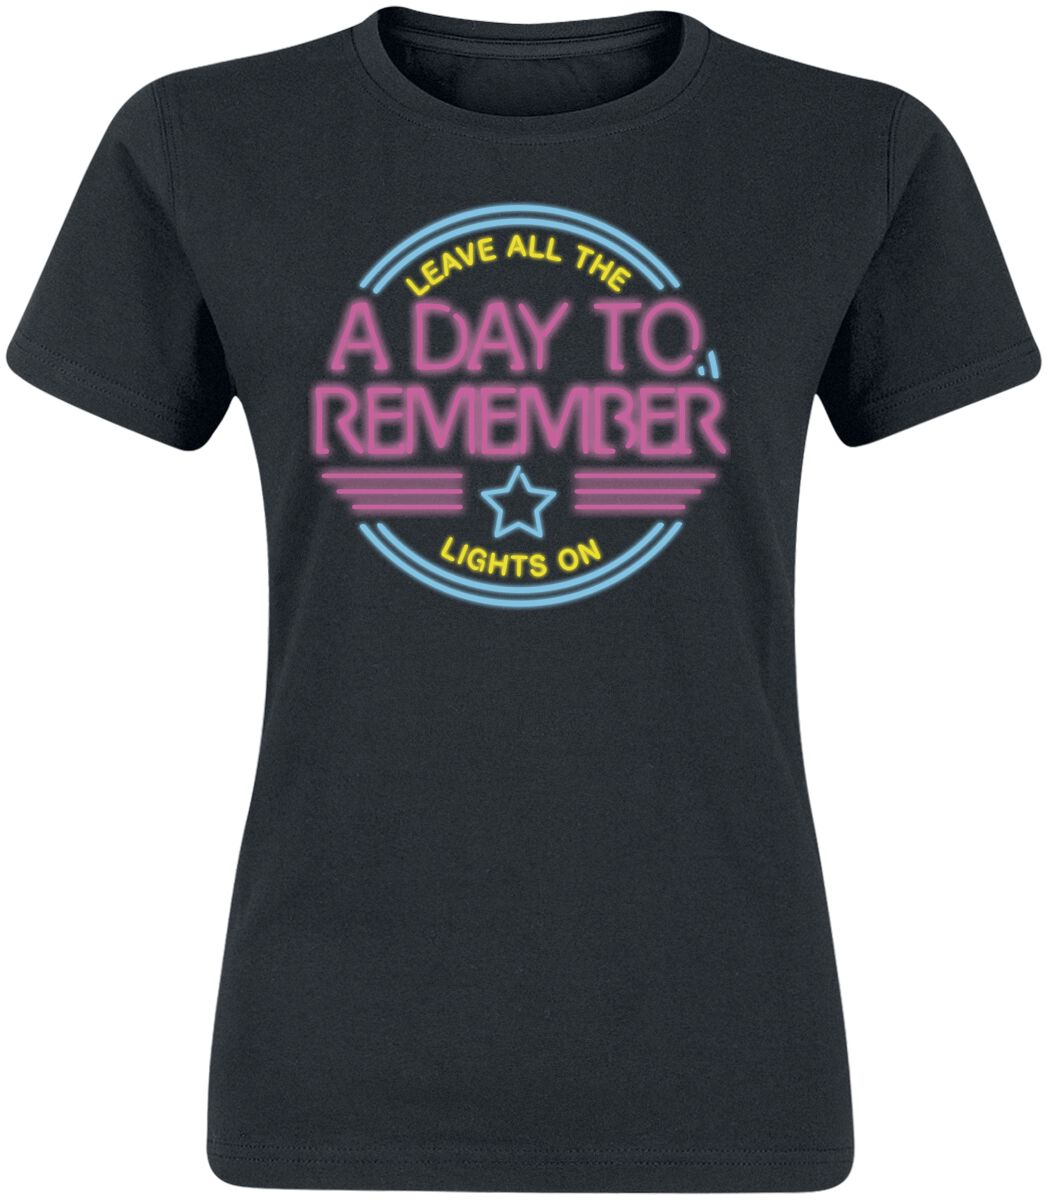 A Day To Remember Leave All The Lights On T-Shirt black